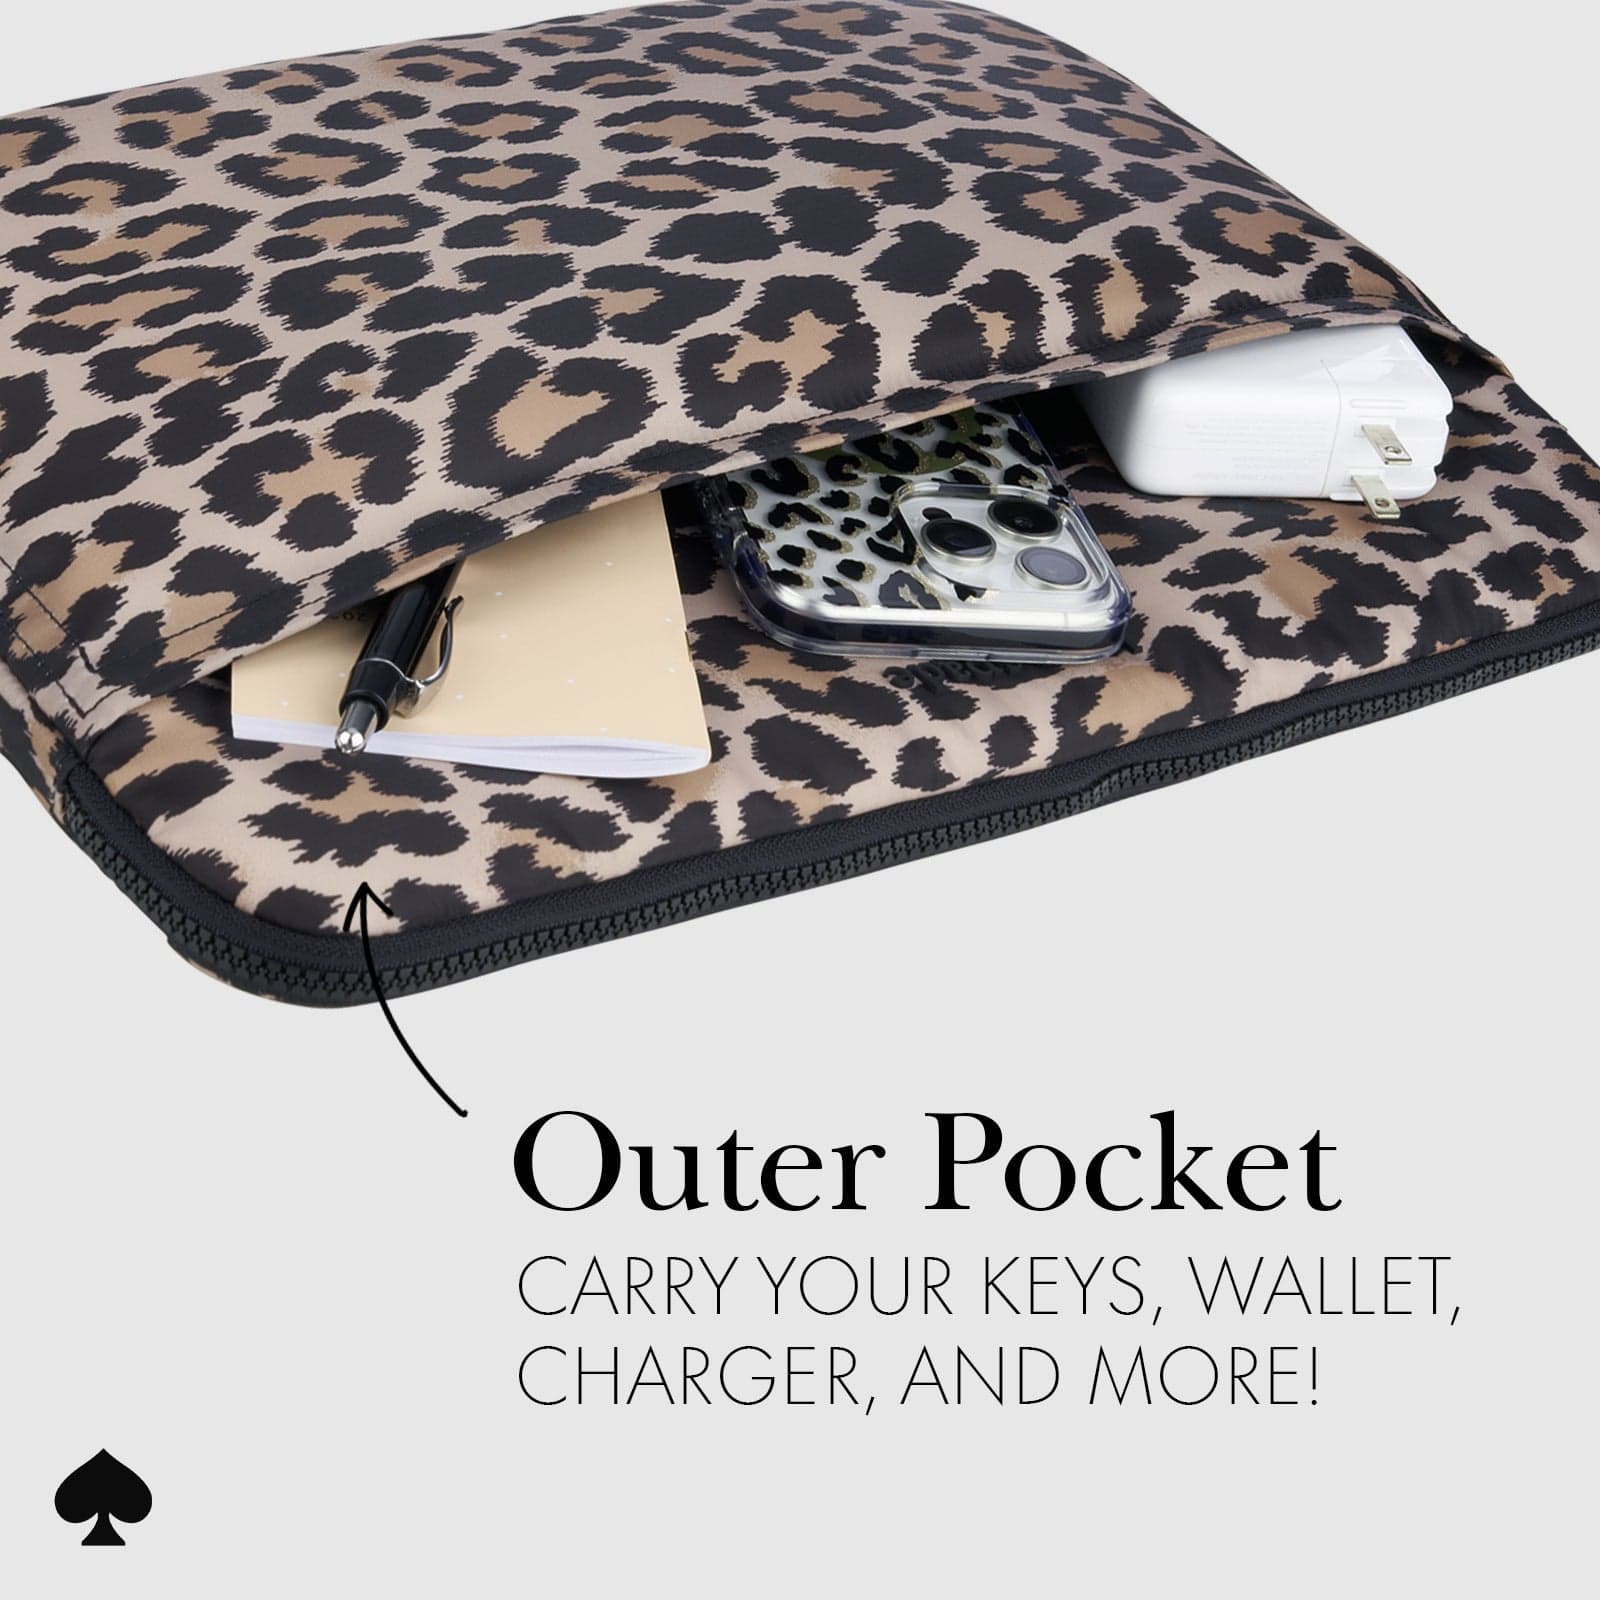 OUTER POCKET. CARRY YOUR KEYS WALLET CHARGER AND MORE!